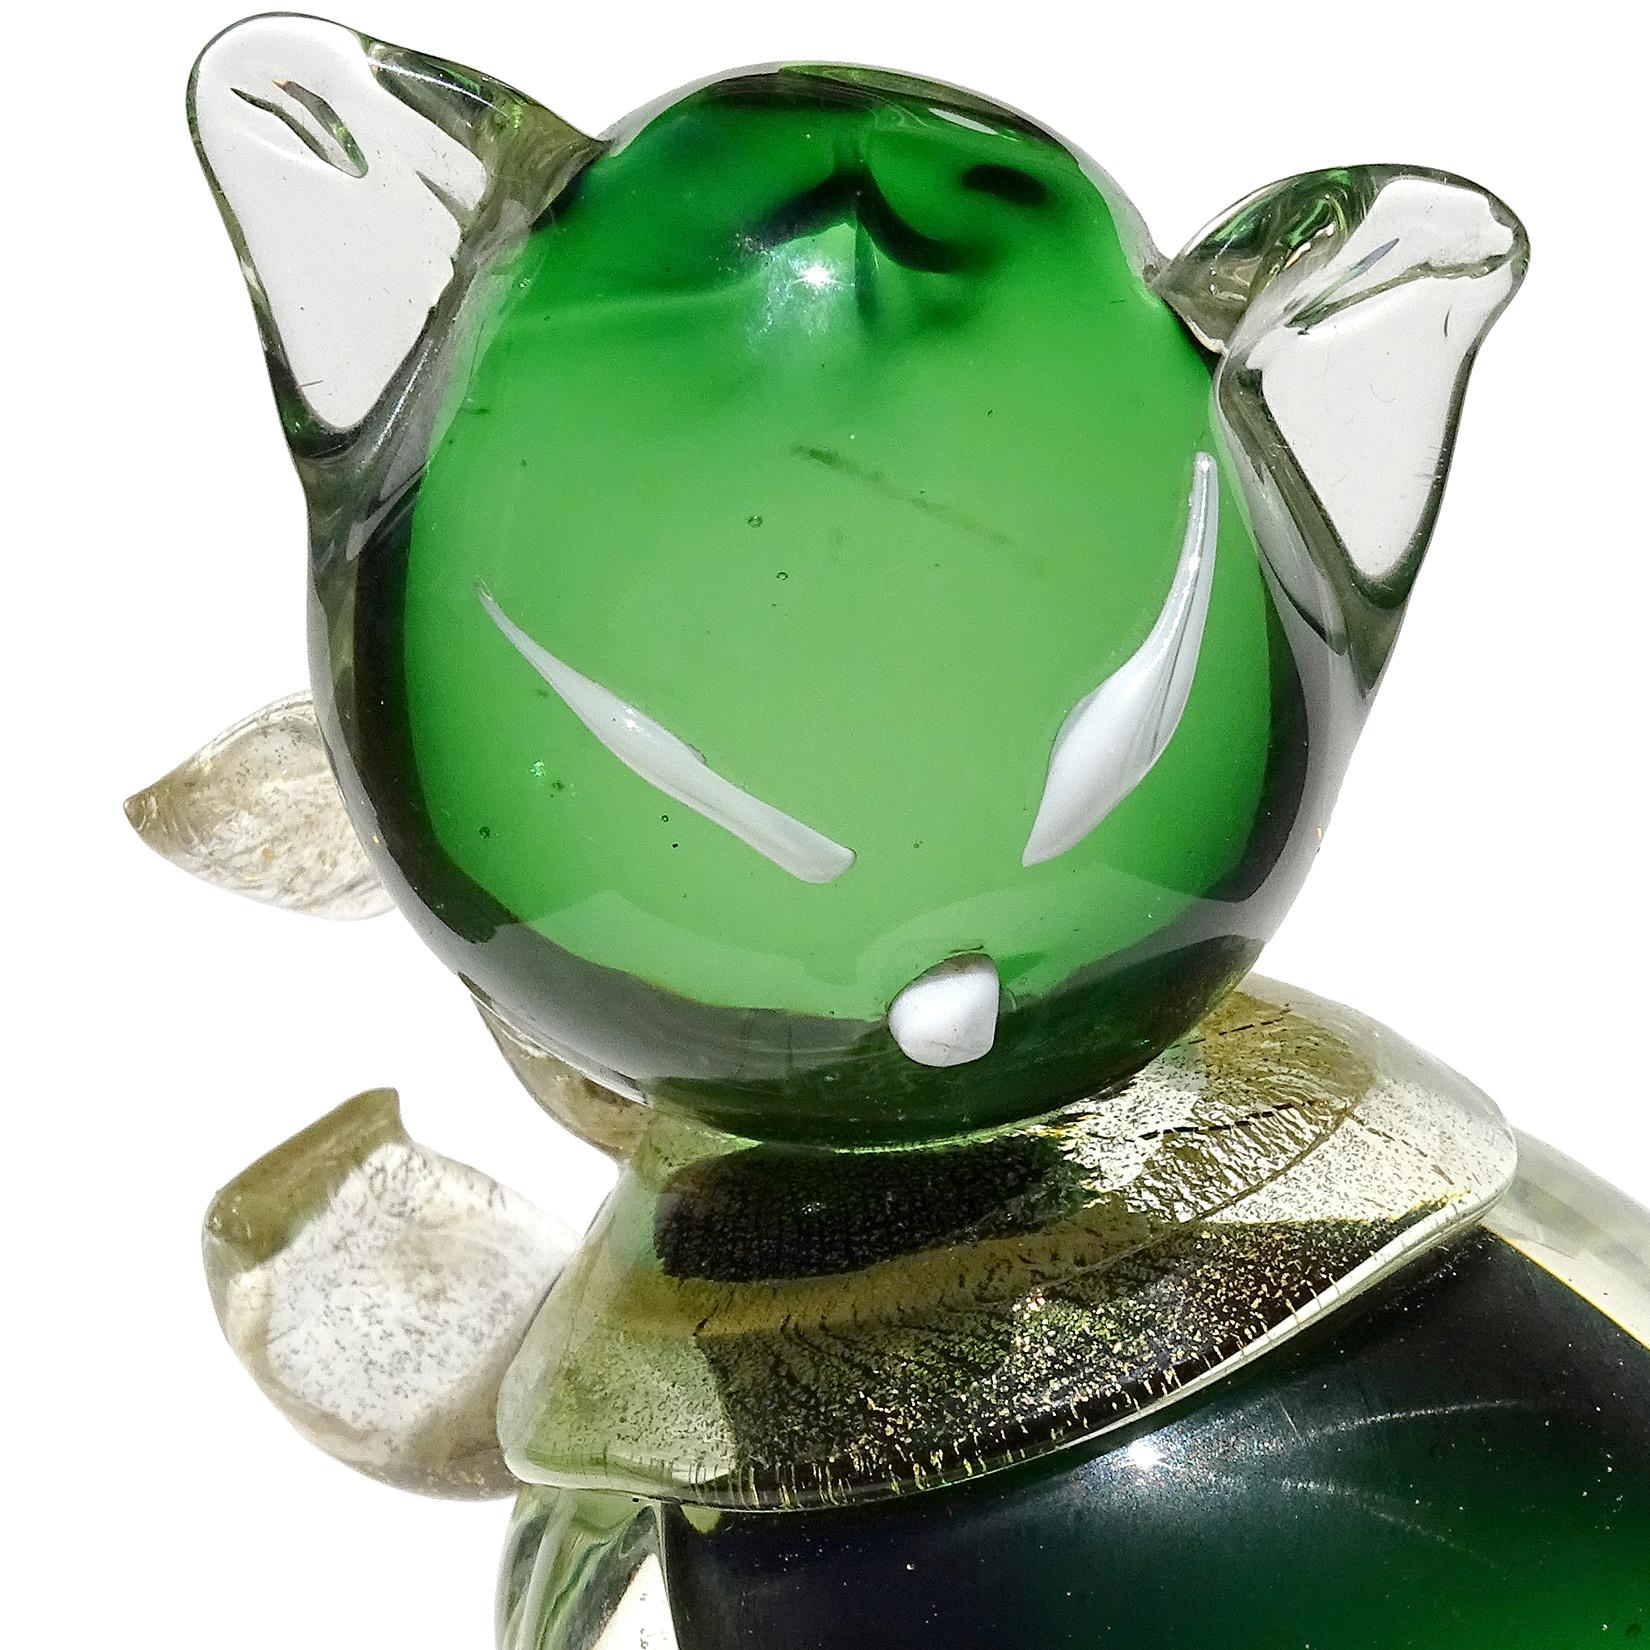 Beautiful Murano hand blown Sommerso green and gold flecks Italian art glass kitty cat sculpture on round base. Attributed to designer Alfredo Barbini. The piece has a gold leaf bow around its neck, gold tail and white eyes and nose. Stands on a